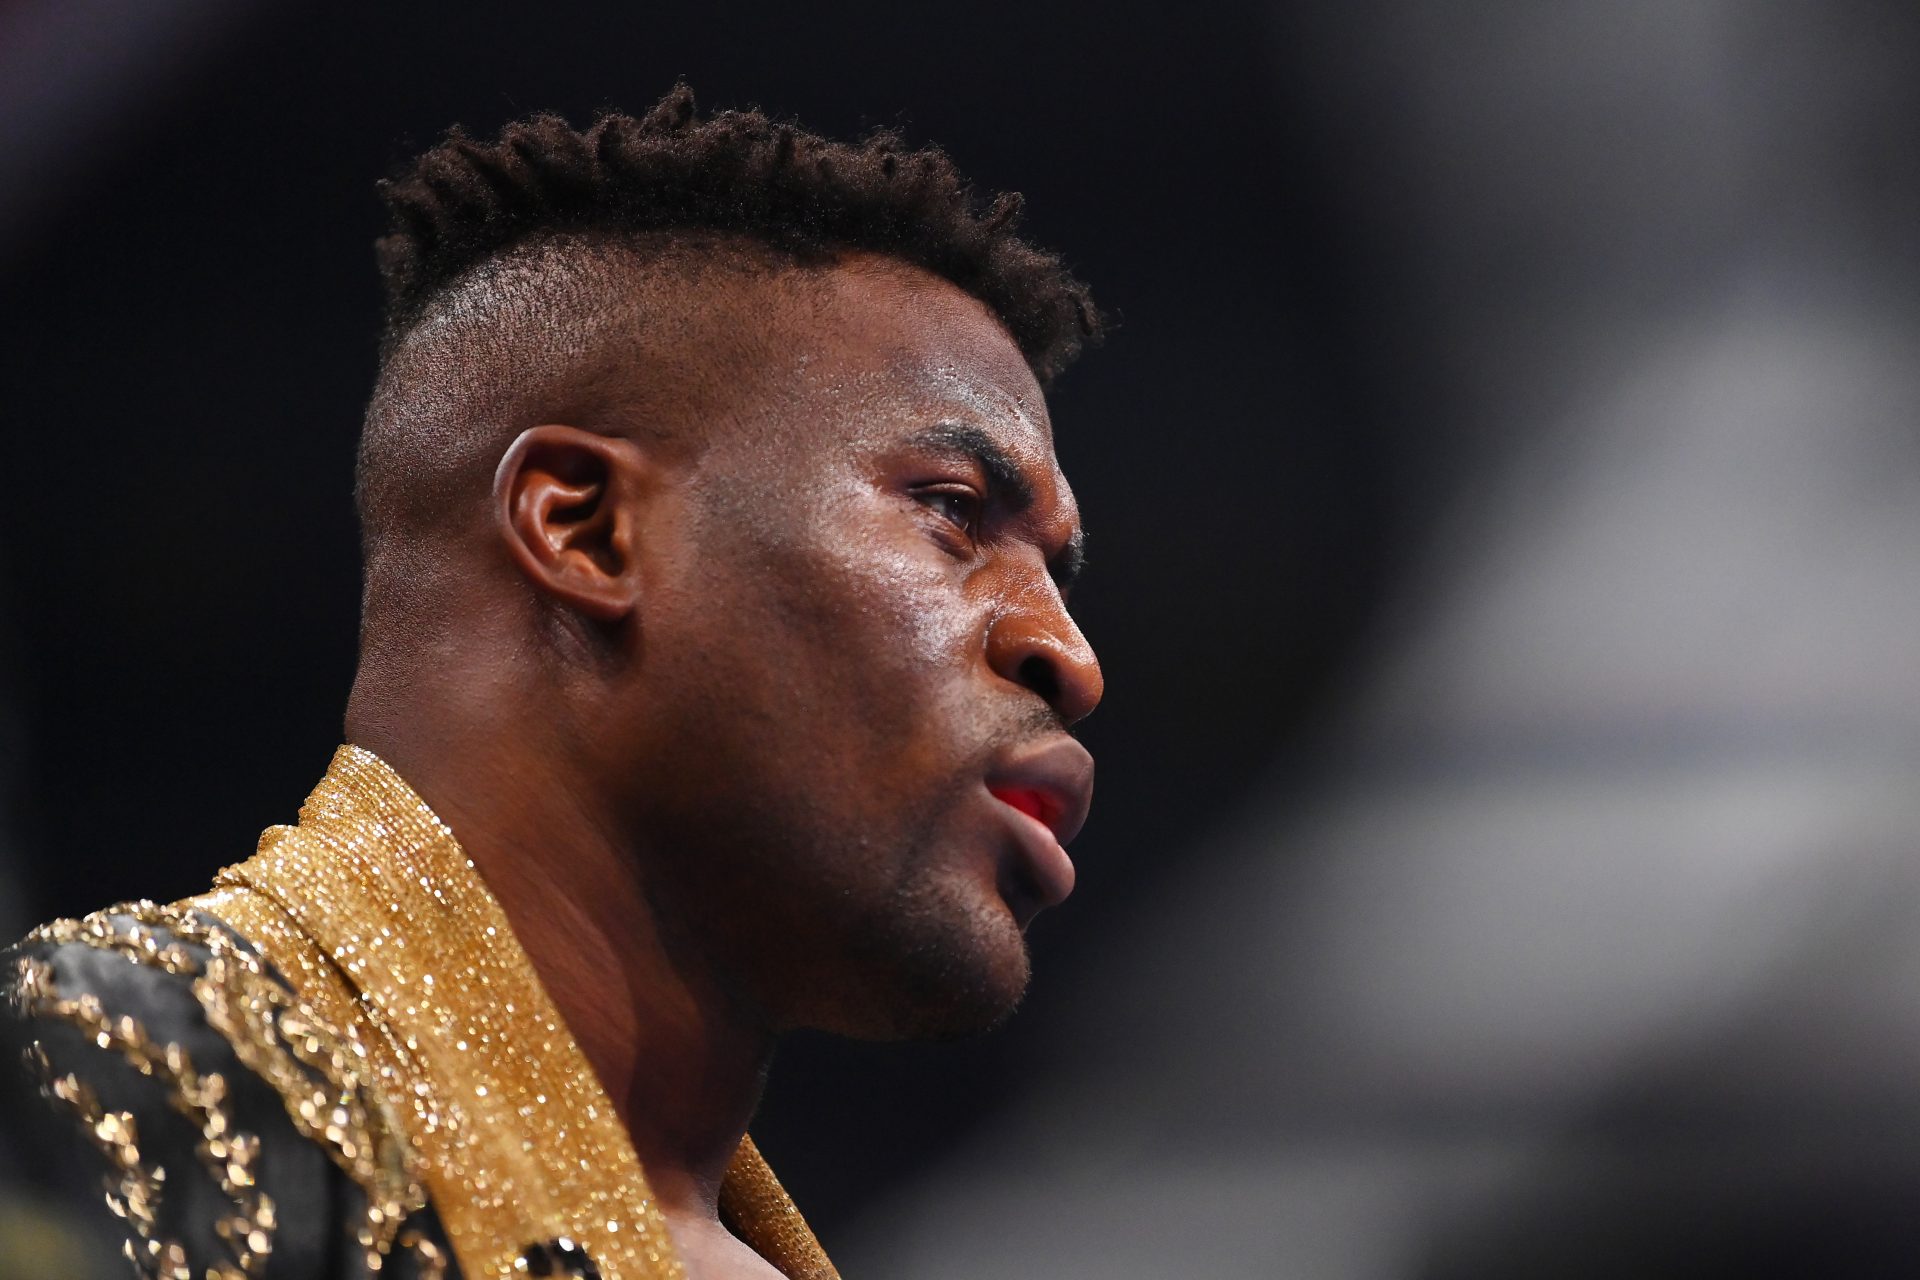 MMA fighter and boxer Francis Ngannou reveals shocking death of 15-month-old son